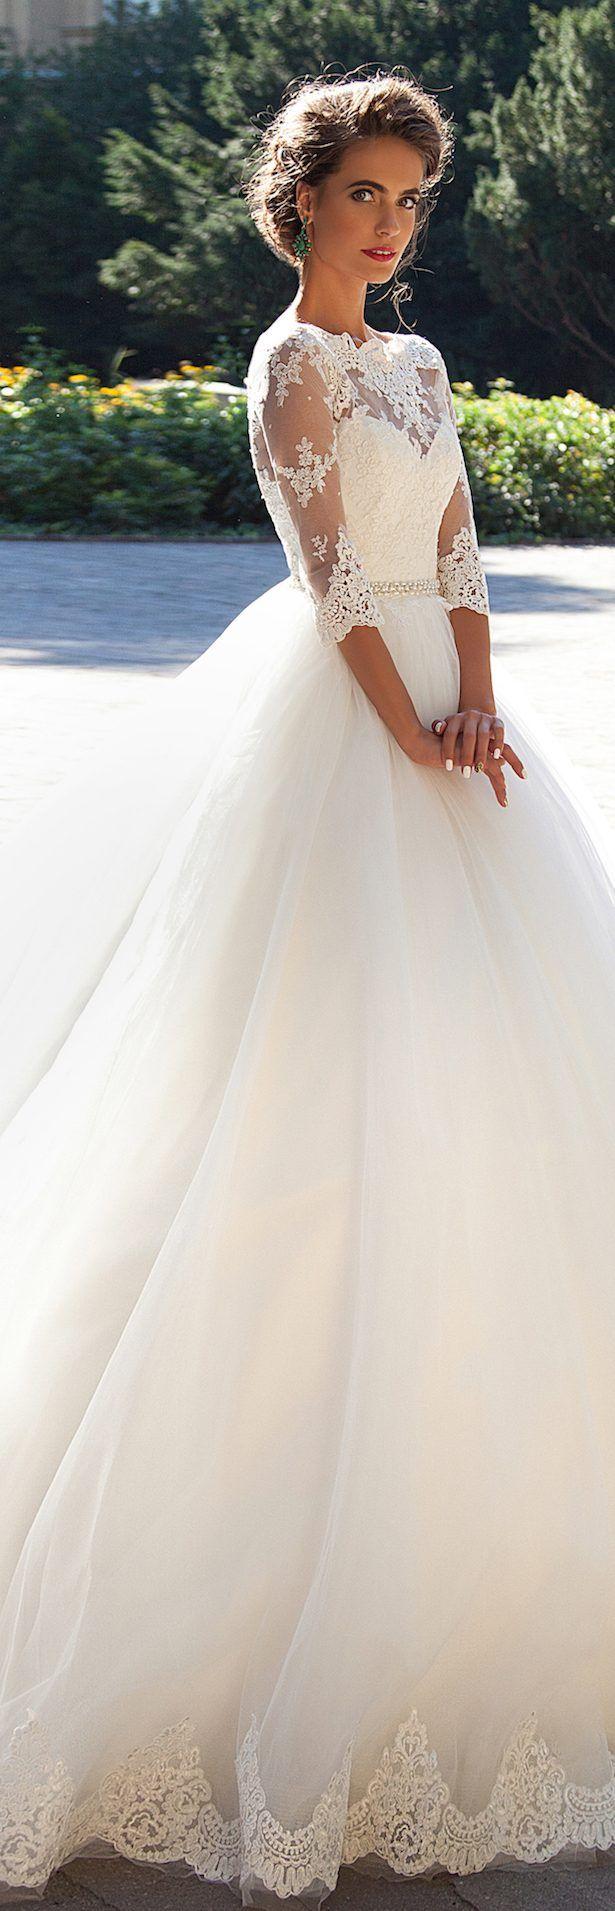 Mariage - 20 Ballgown Wedding Dresses That Will Leave You Speachless